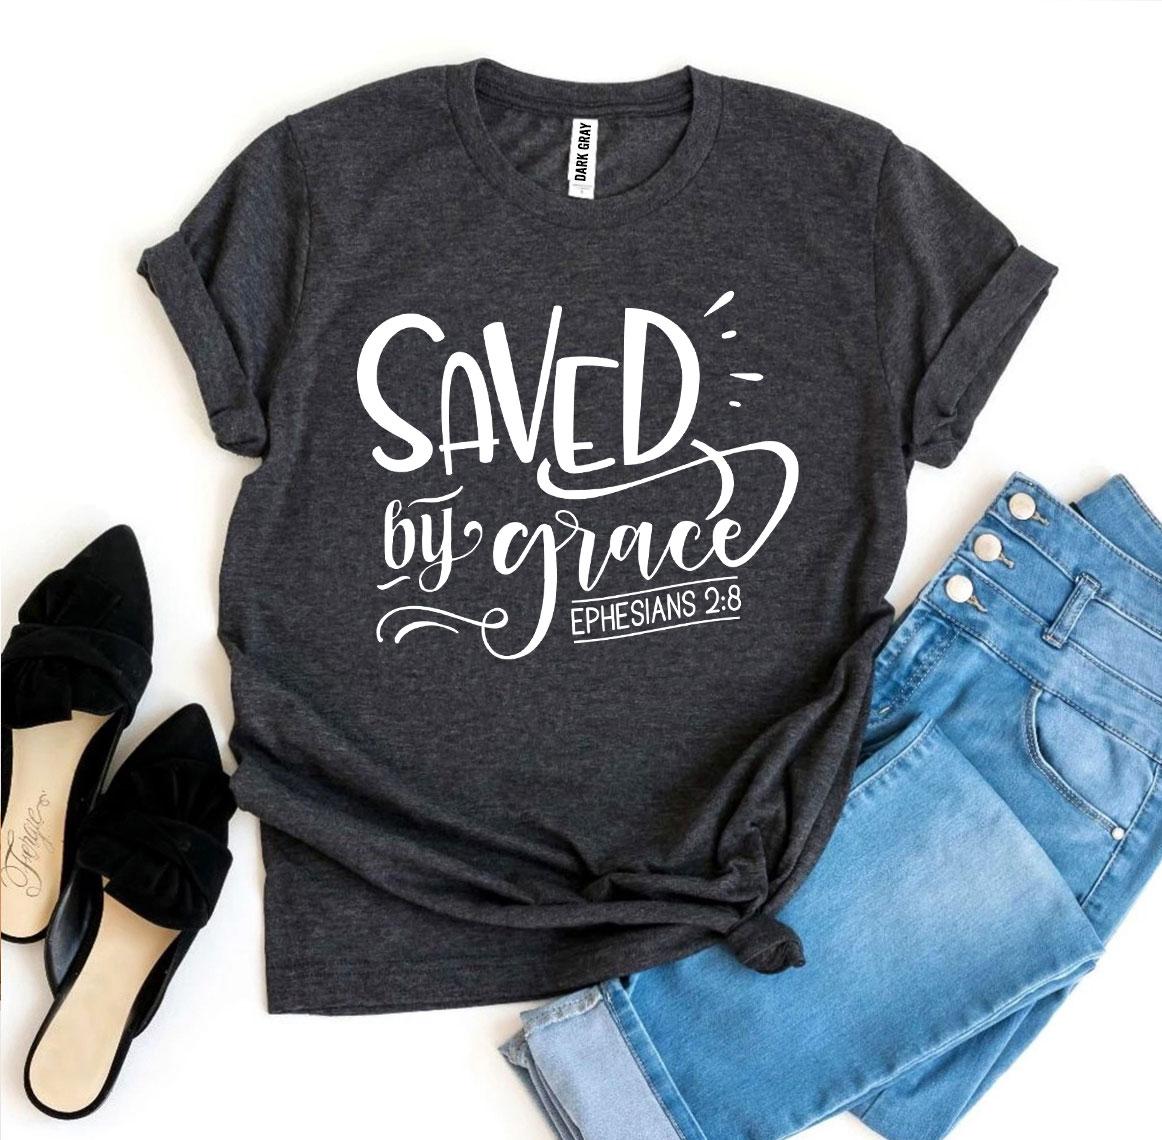 Saved By Grace Ephesians 2:8 T-shirt